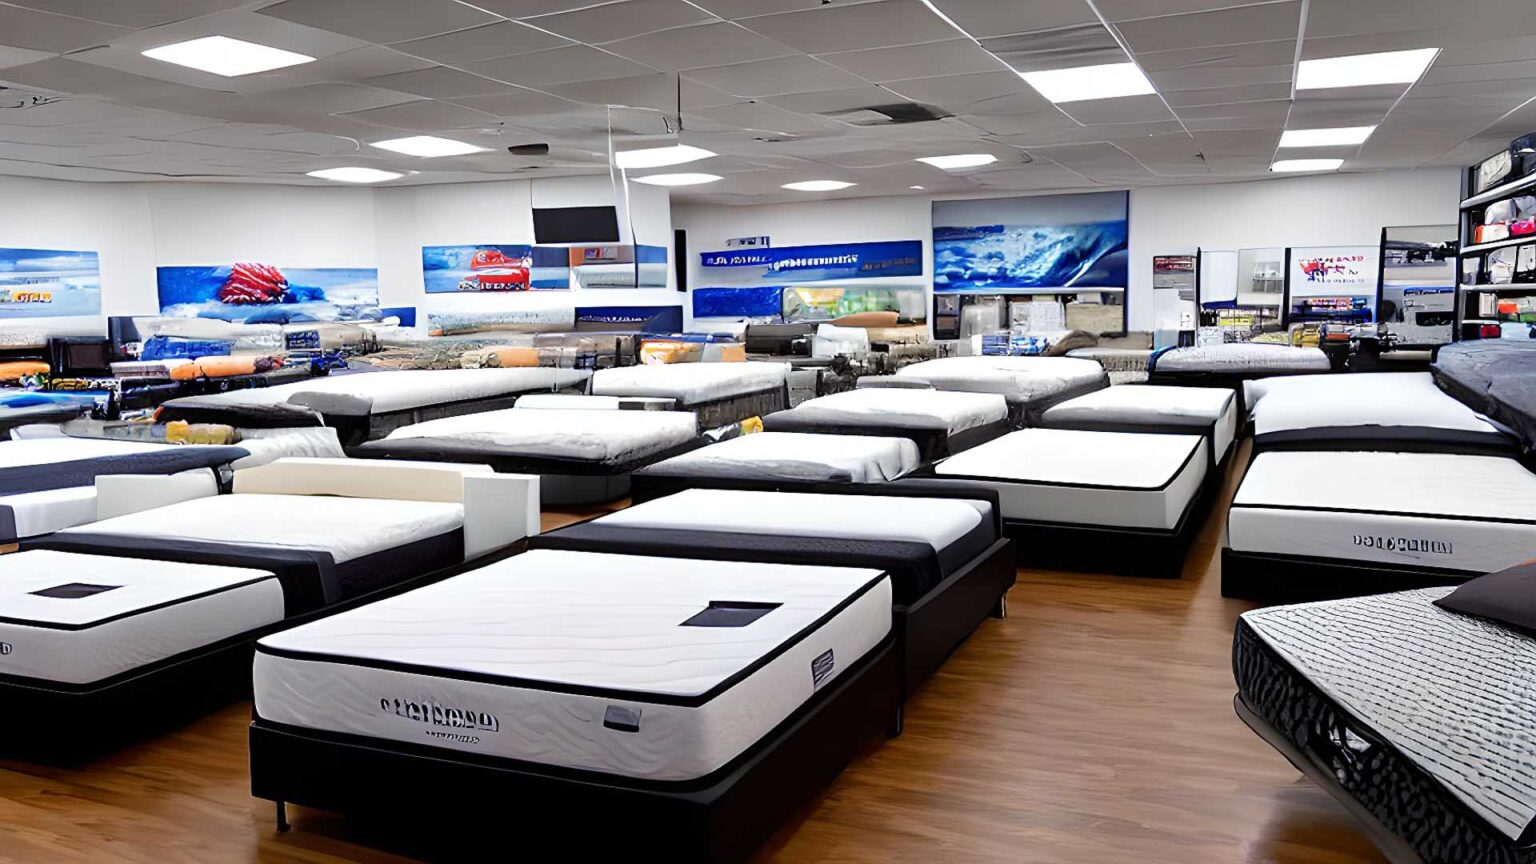 Mattress Stores, mattress dealers, and mattress retailers near me in Knoxville, TN